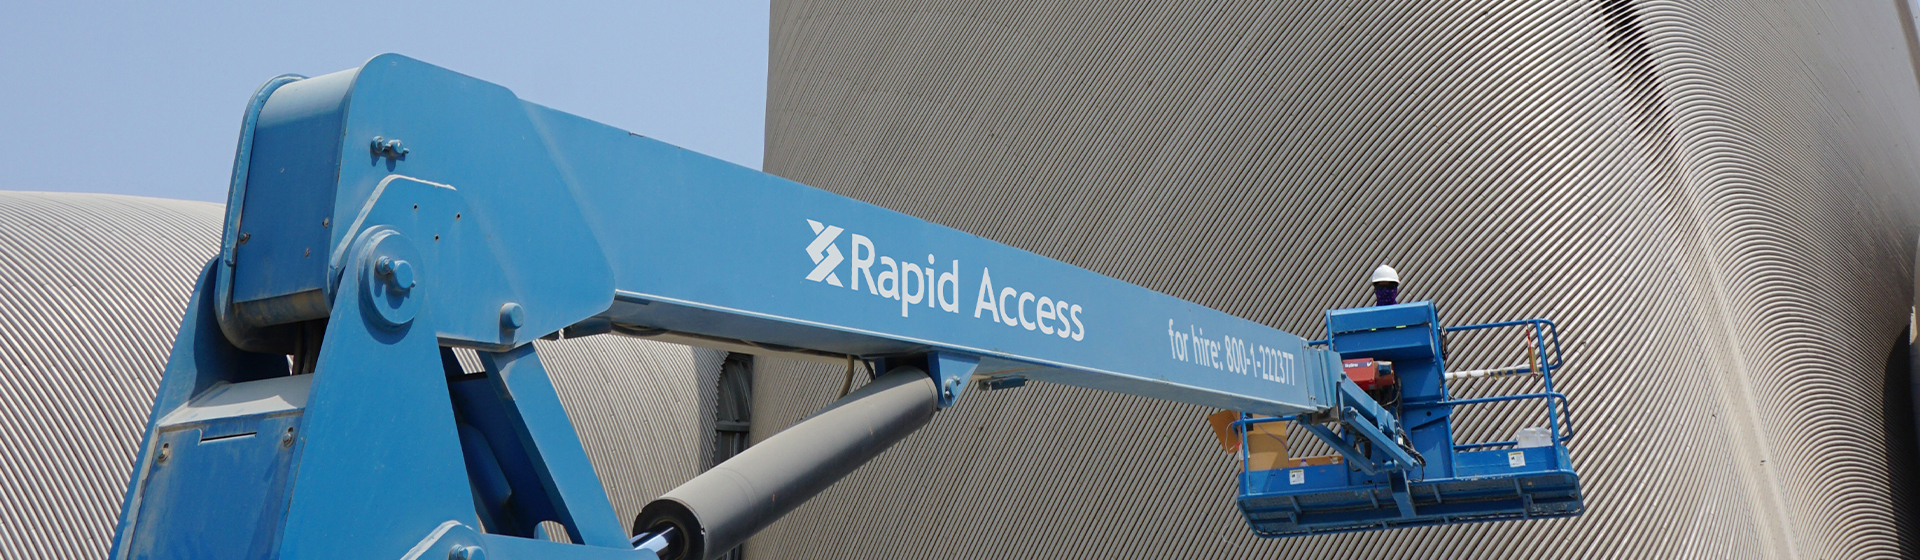 About Rapid Access